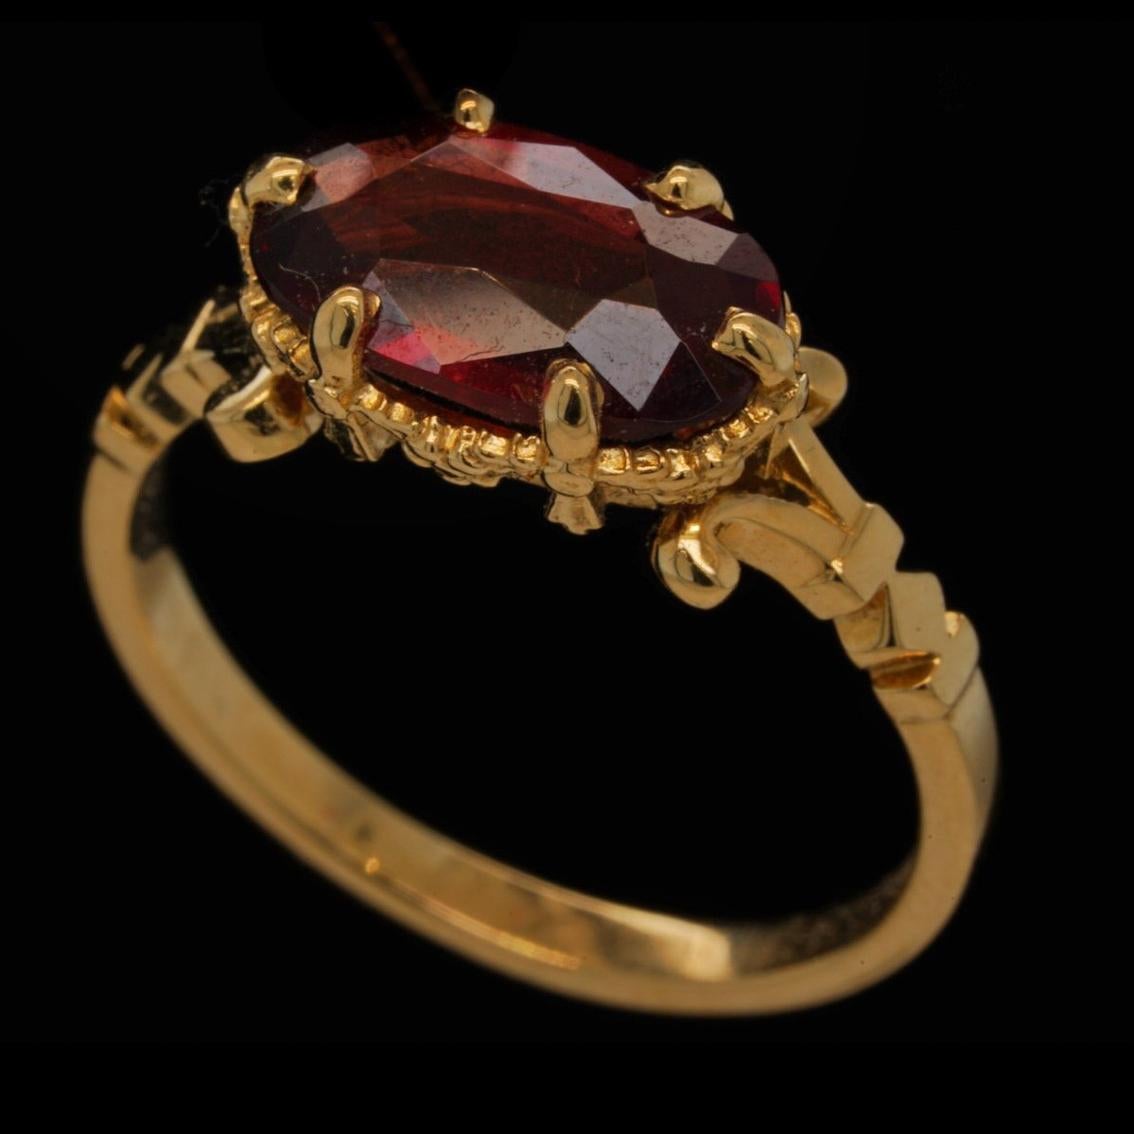 Women's Persephone's Pomegranate Ring in 9 Karat Yellow Gold with Oval Garnet